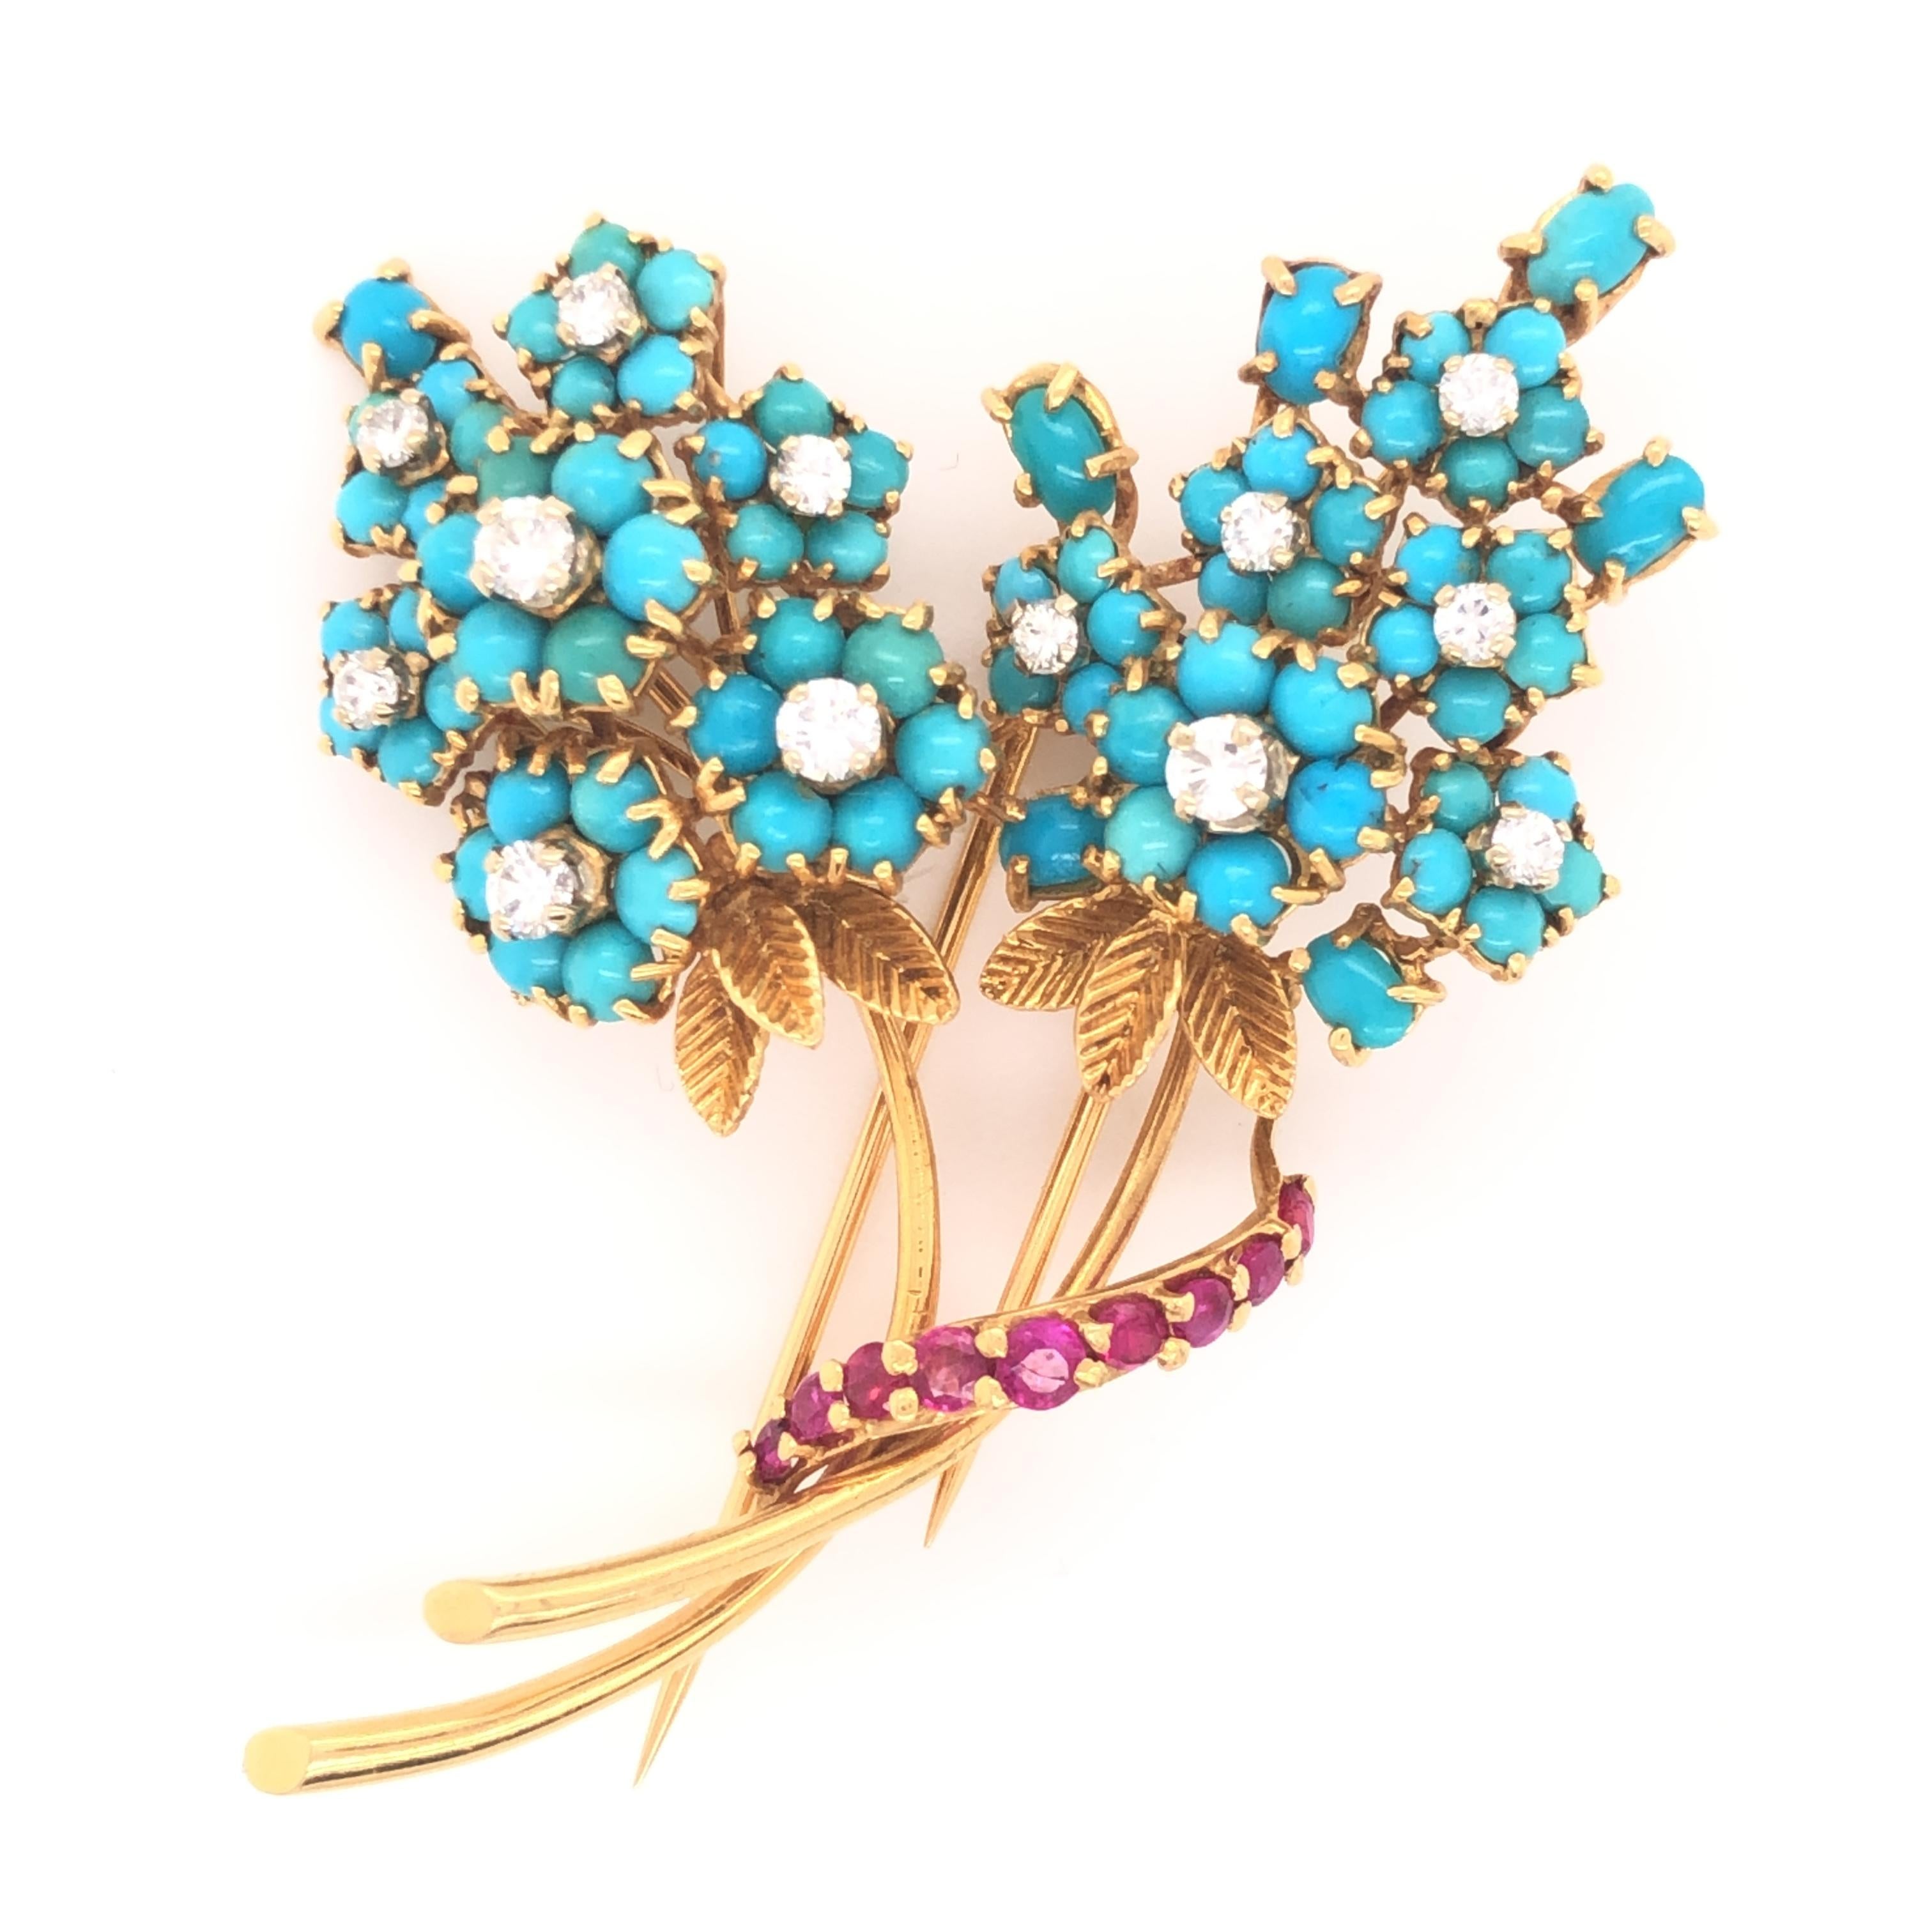 Gorgeous French made brooch crafted in 18k yellow gold. This fantastic piece depicts vibrant flowers set with cabochon set turquoise gemstones displaying natural colors. The blue color in the turquoise pops off the design making this piece sure to